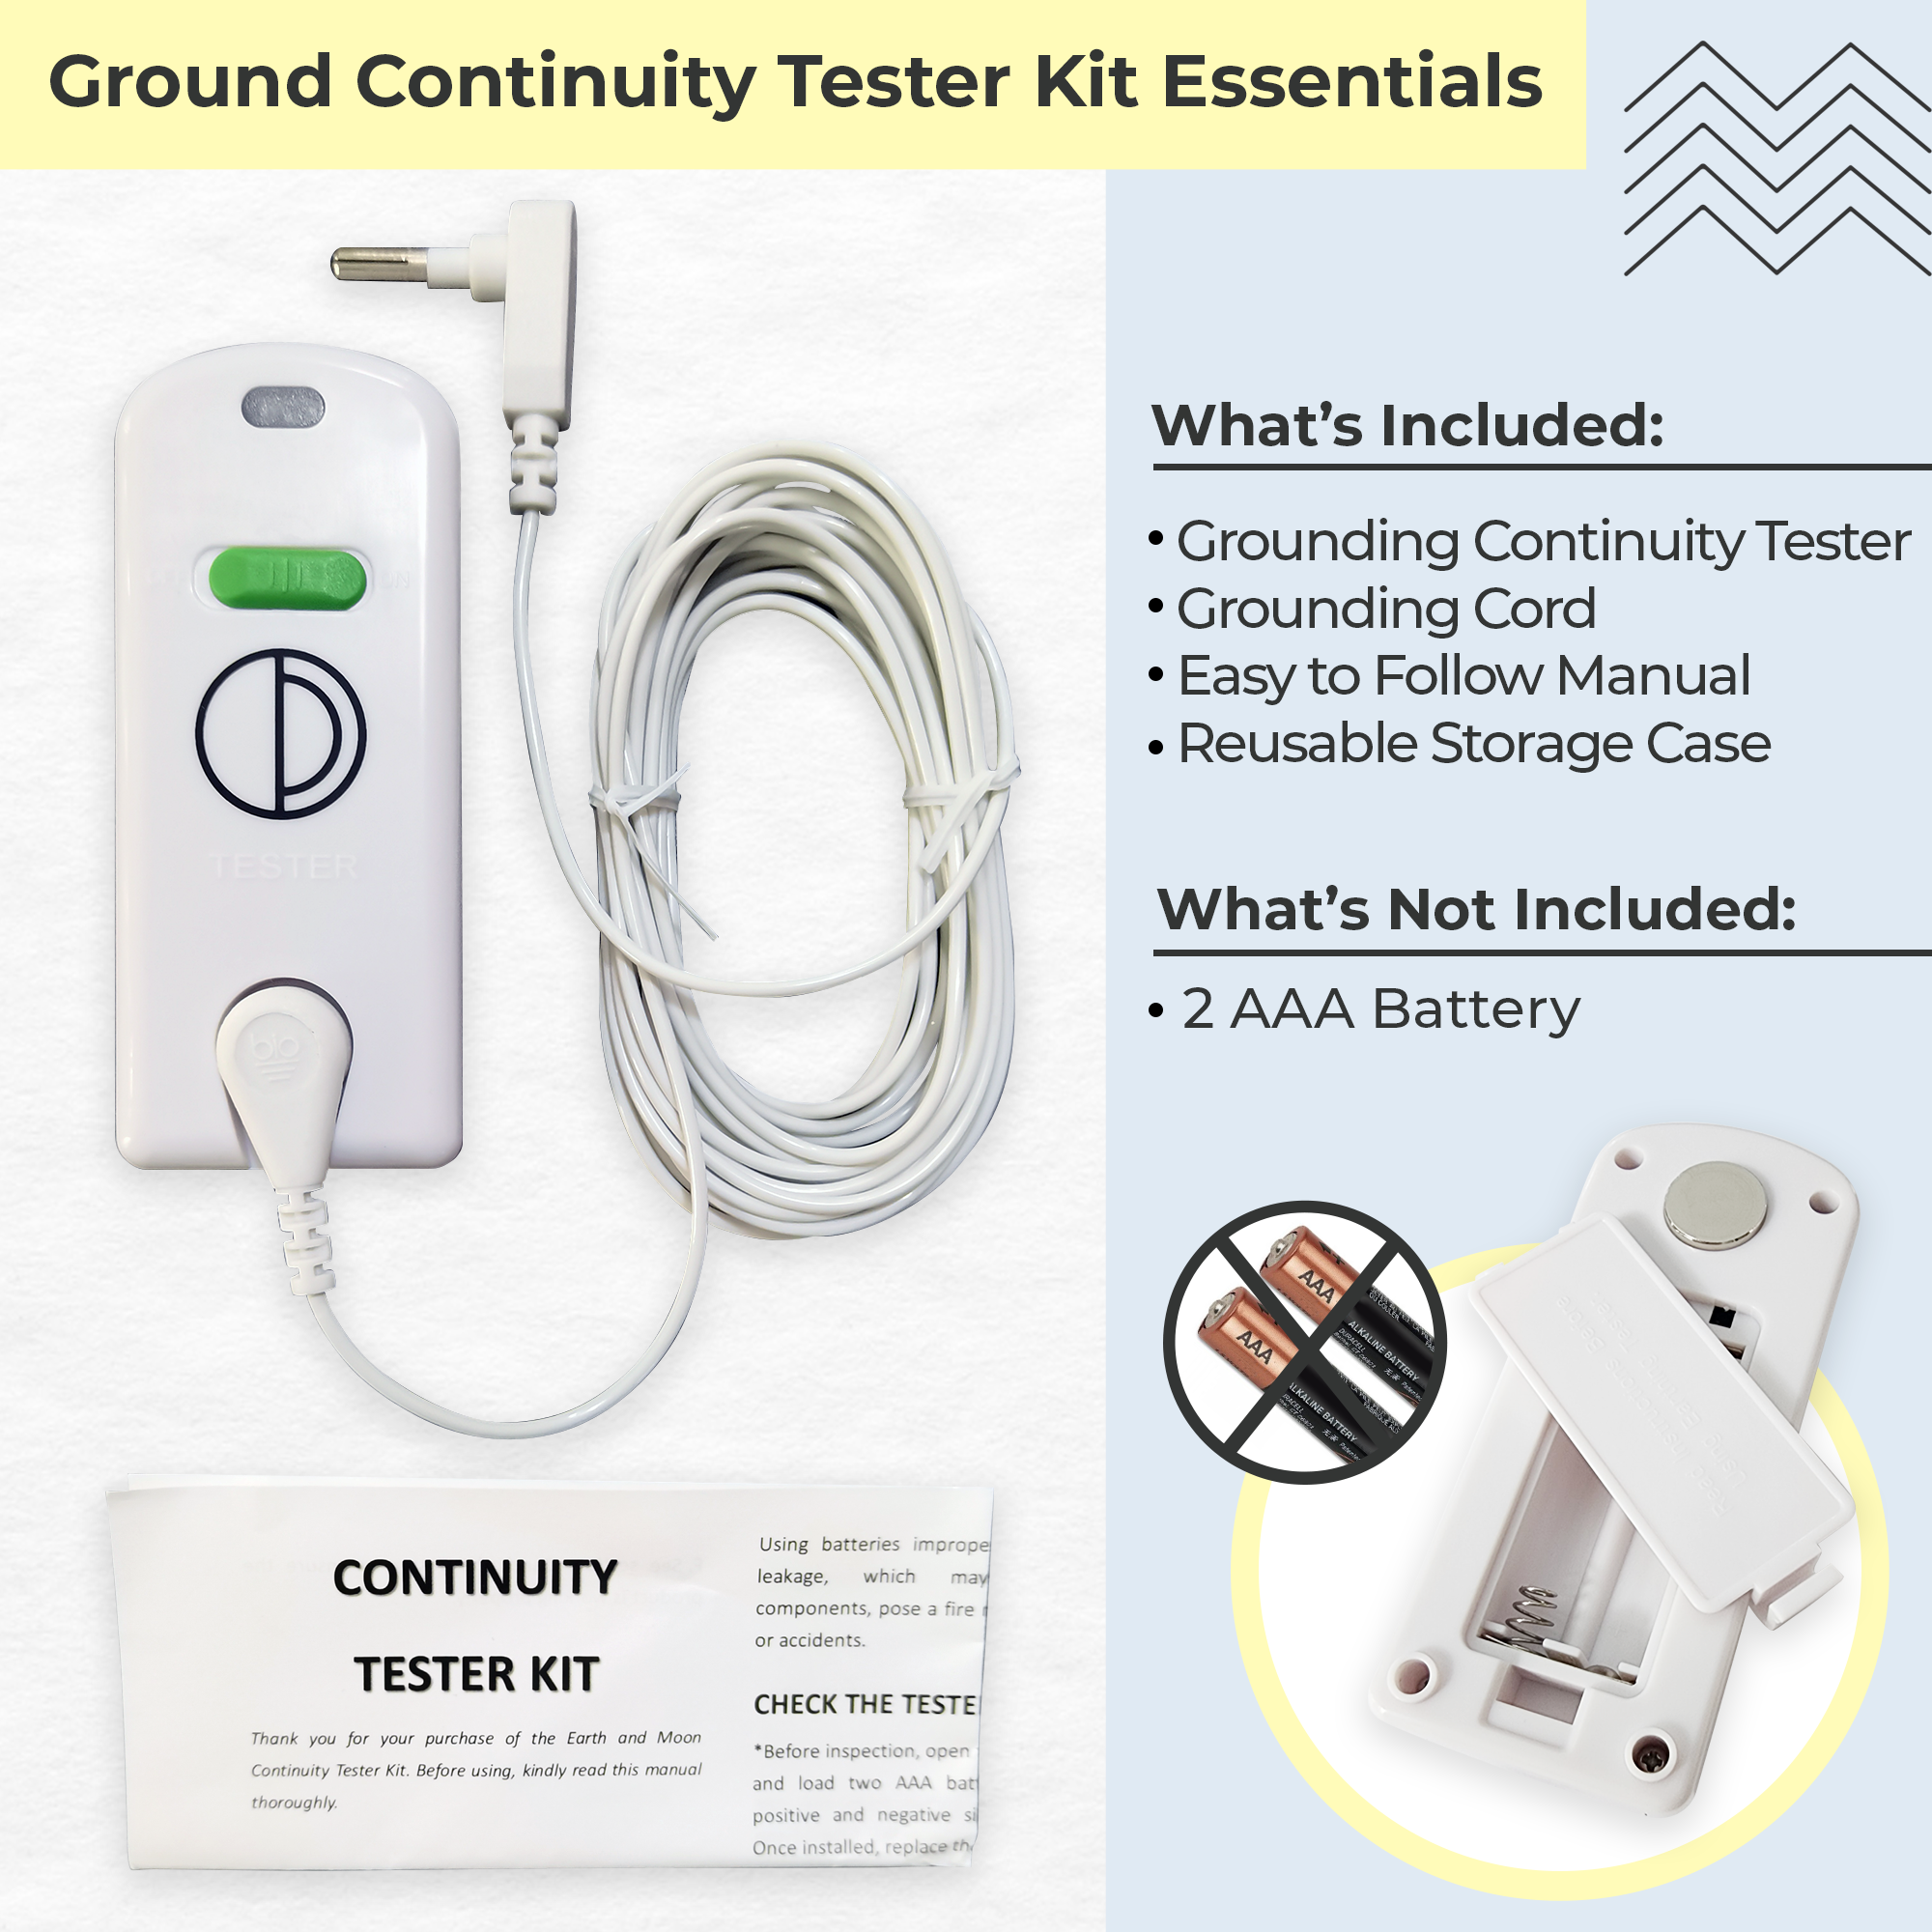 earth and moon ground continuity tester kit essentials to ensure your grounding mat has continuity